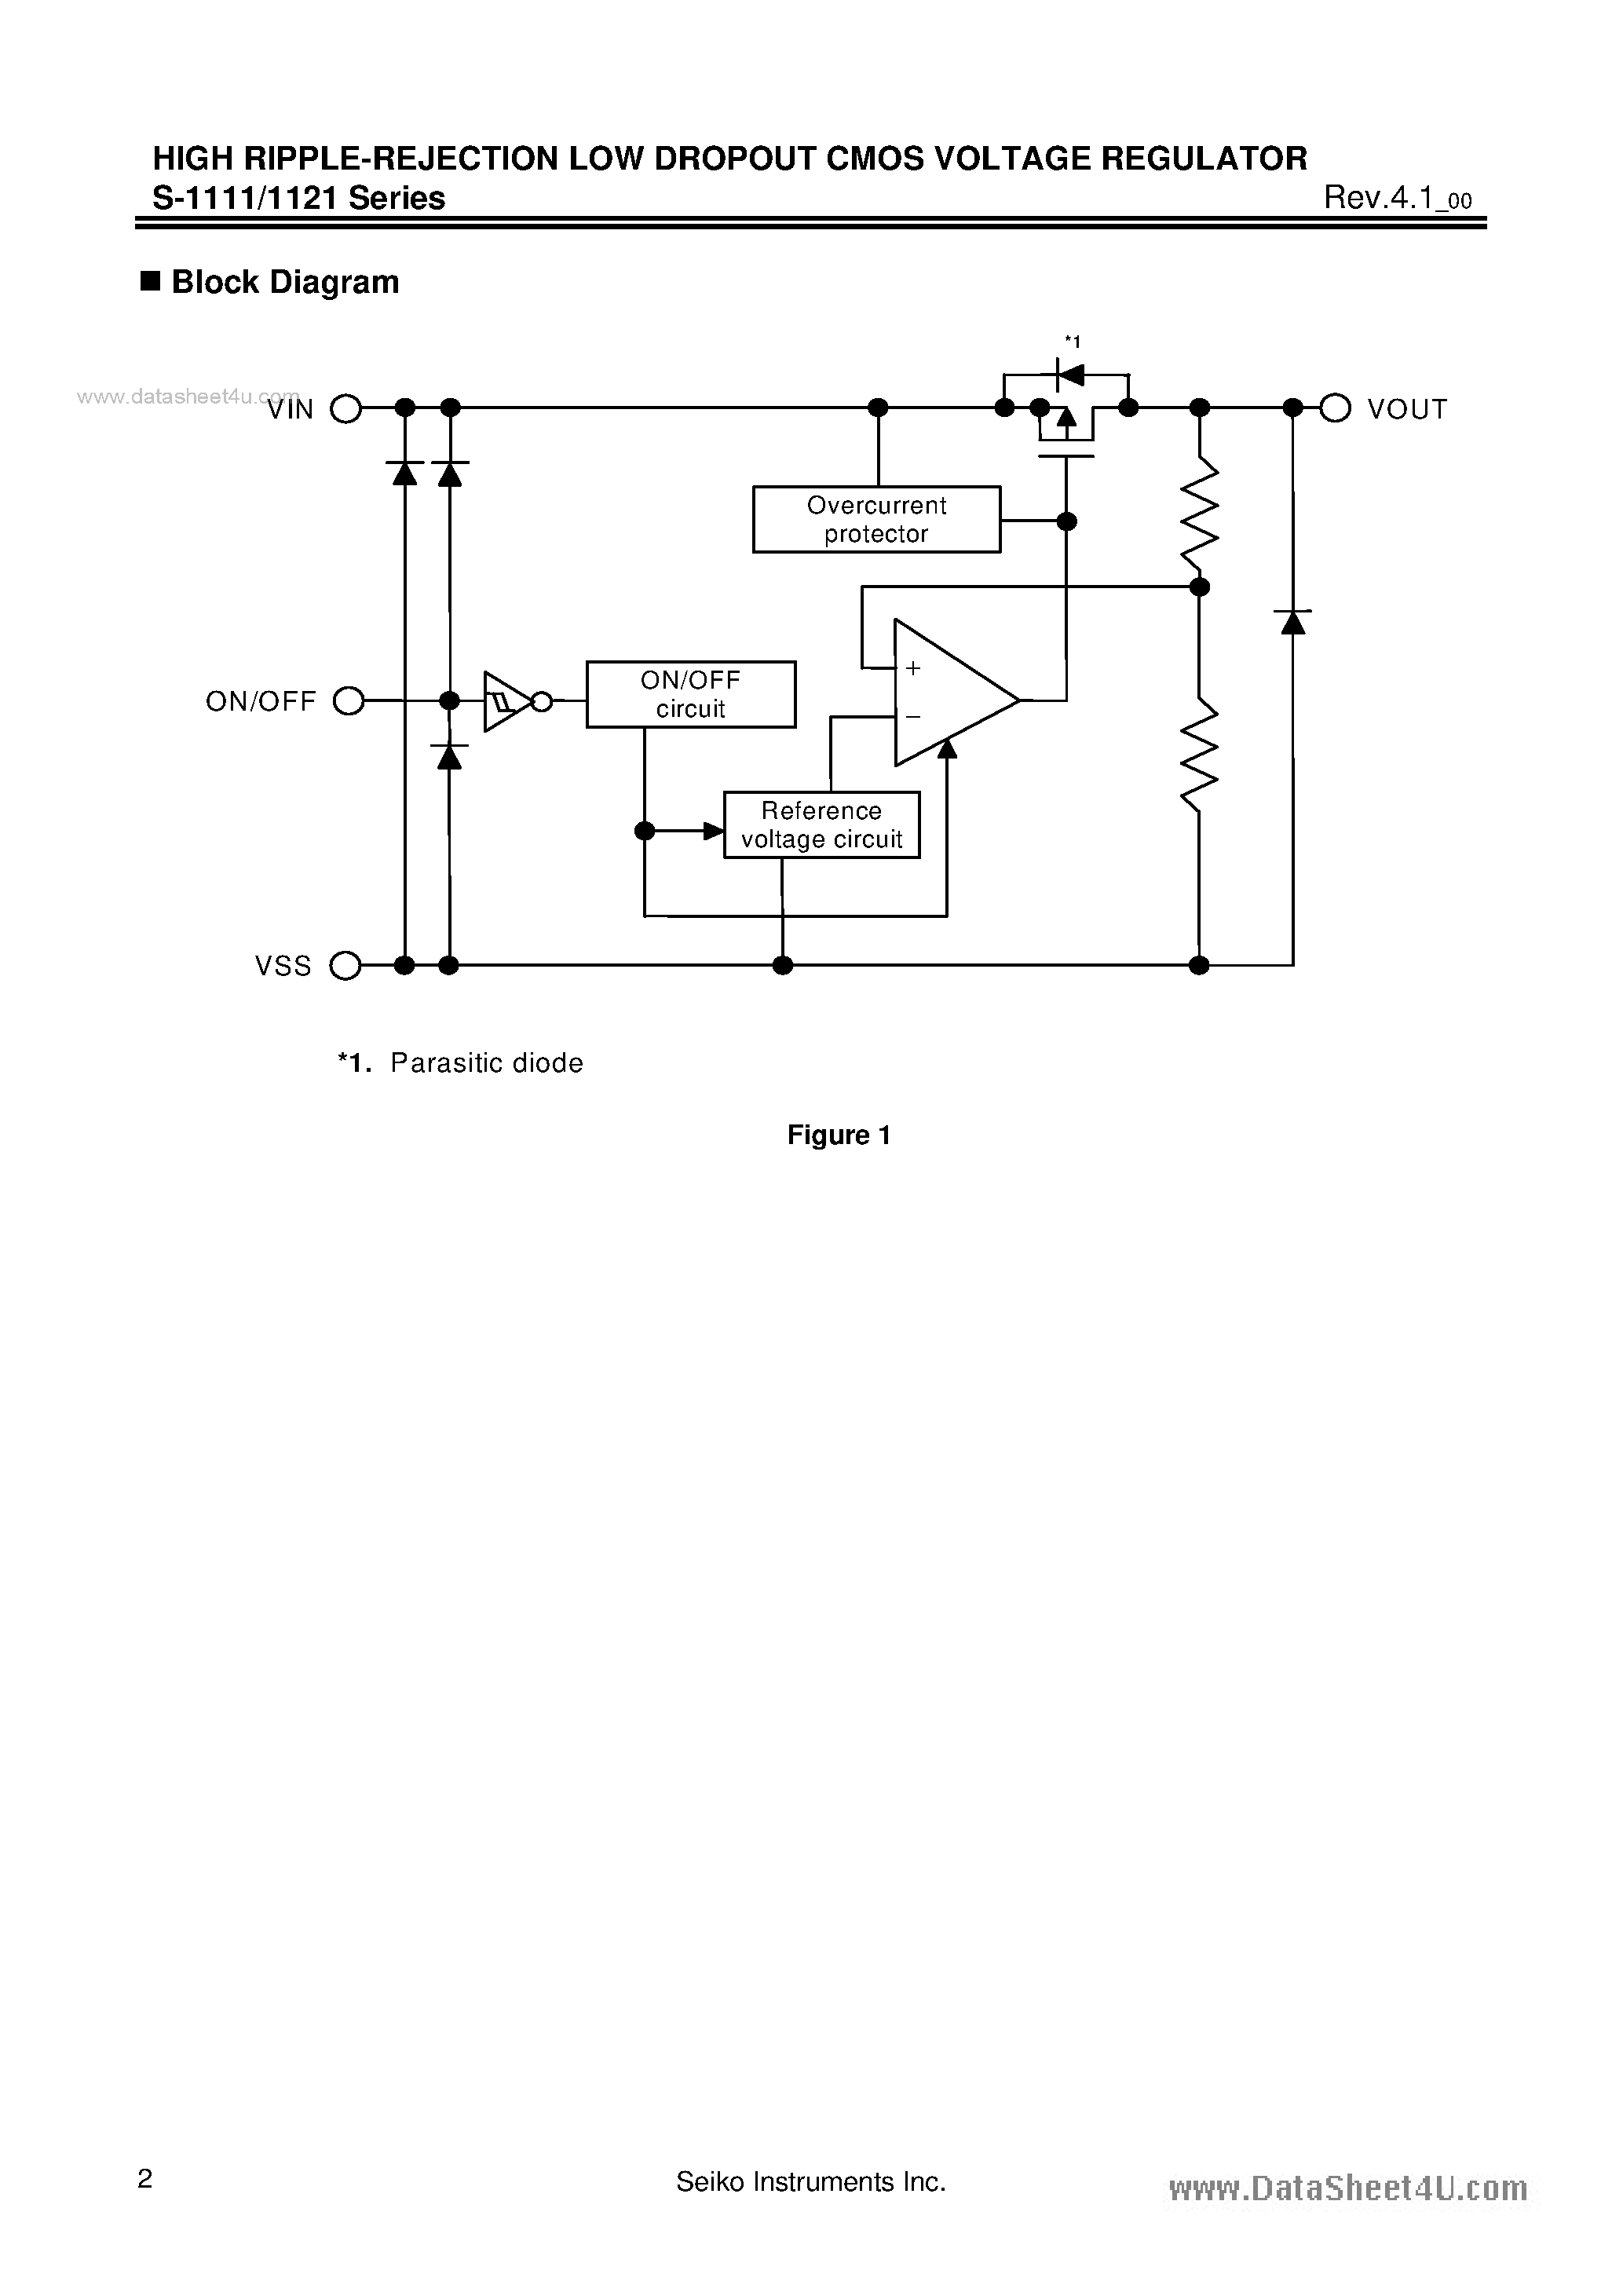 Datasheet S-1111 - (S-1111 / S-1121) HIGH RIPPLE-REJECTION LOW DROPOUT page 2